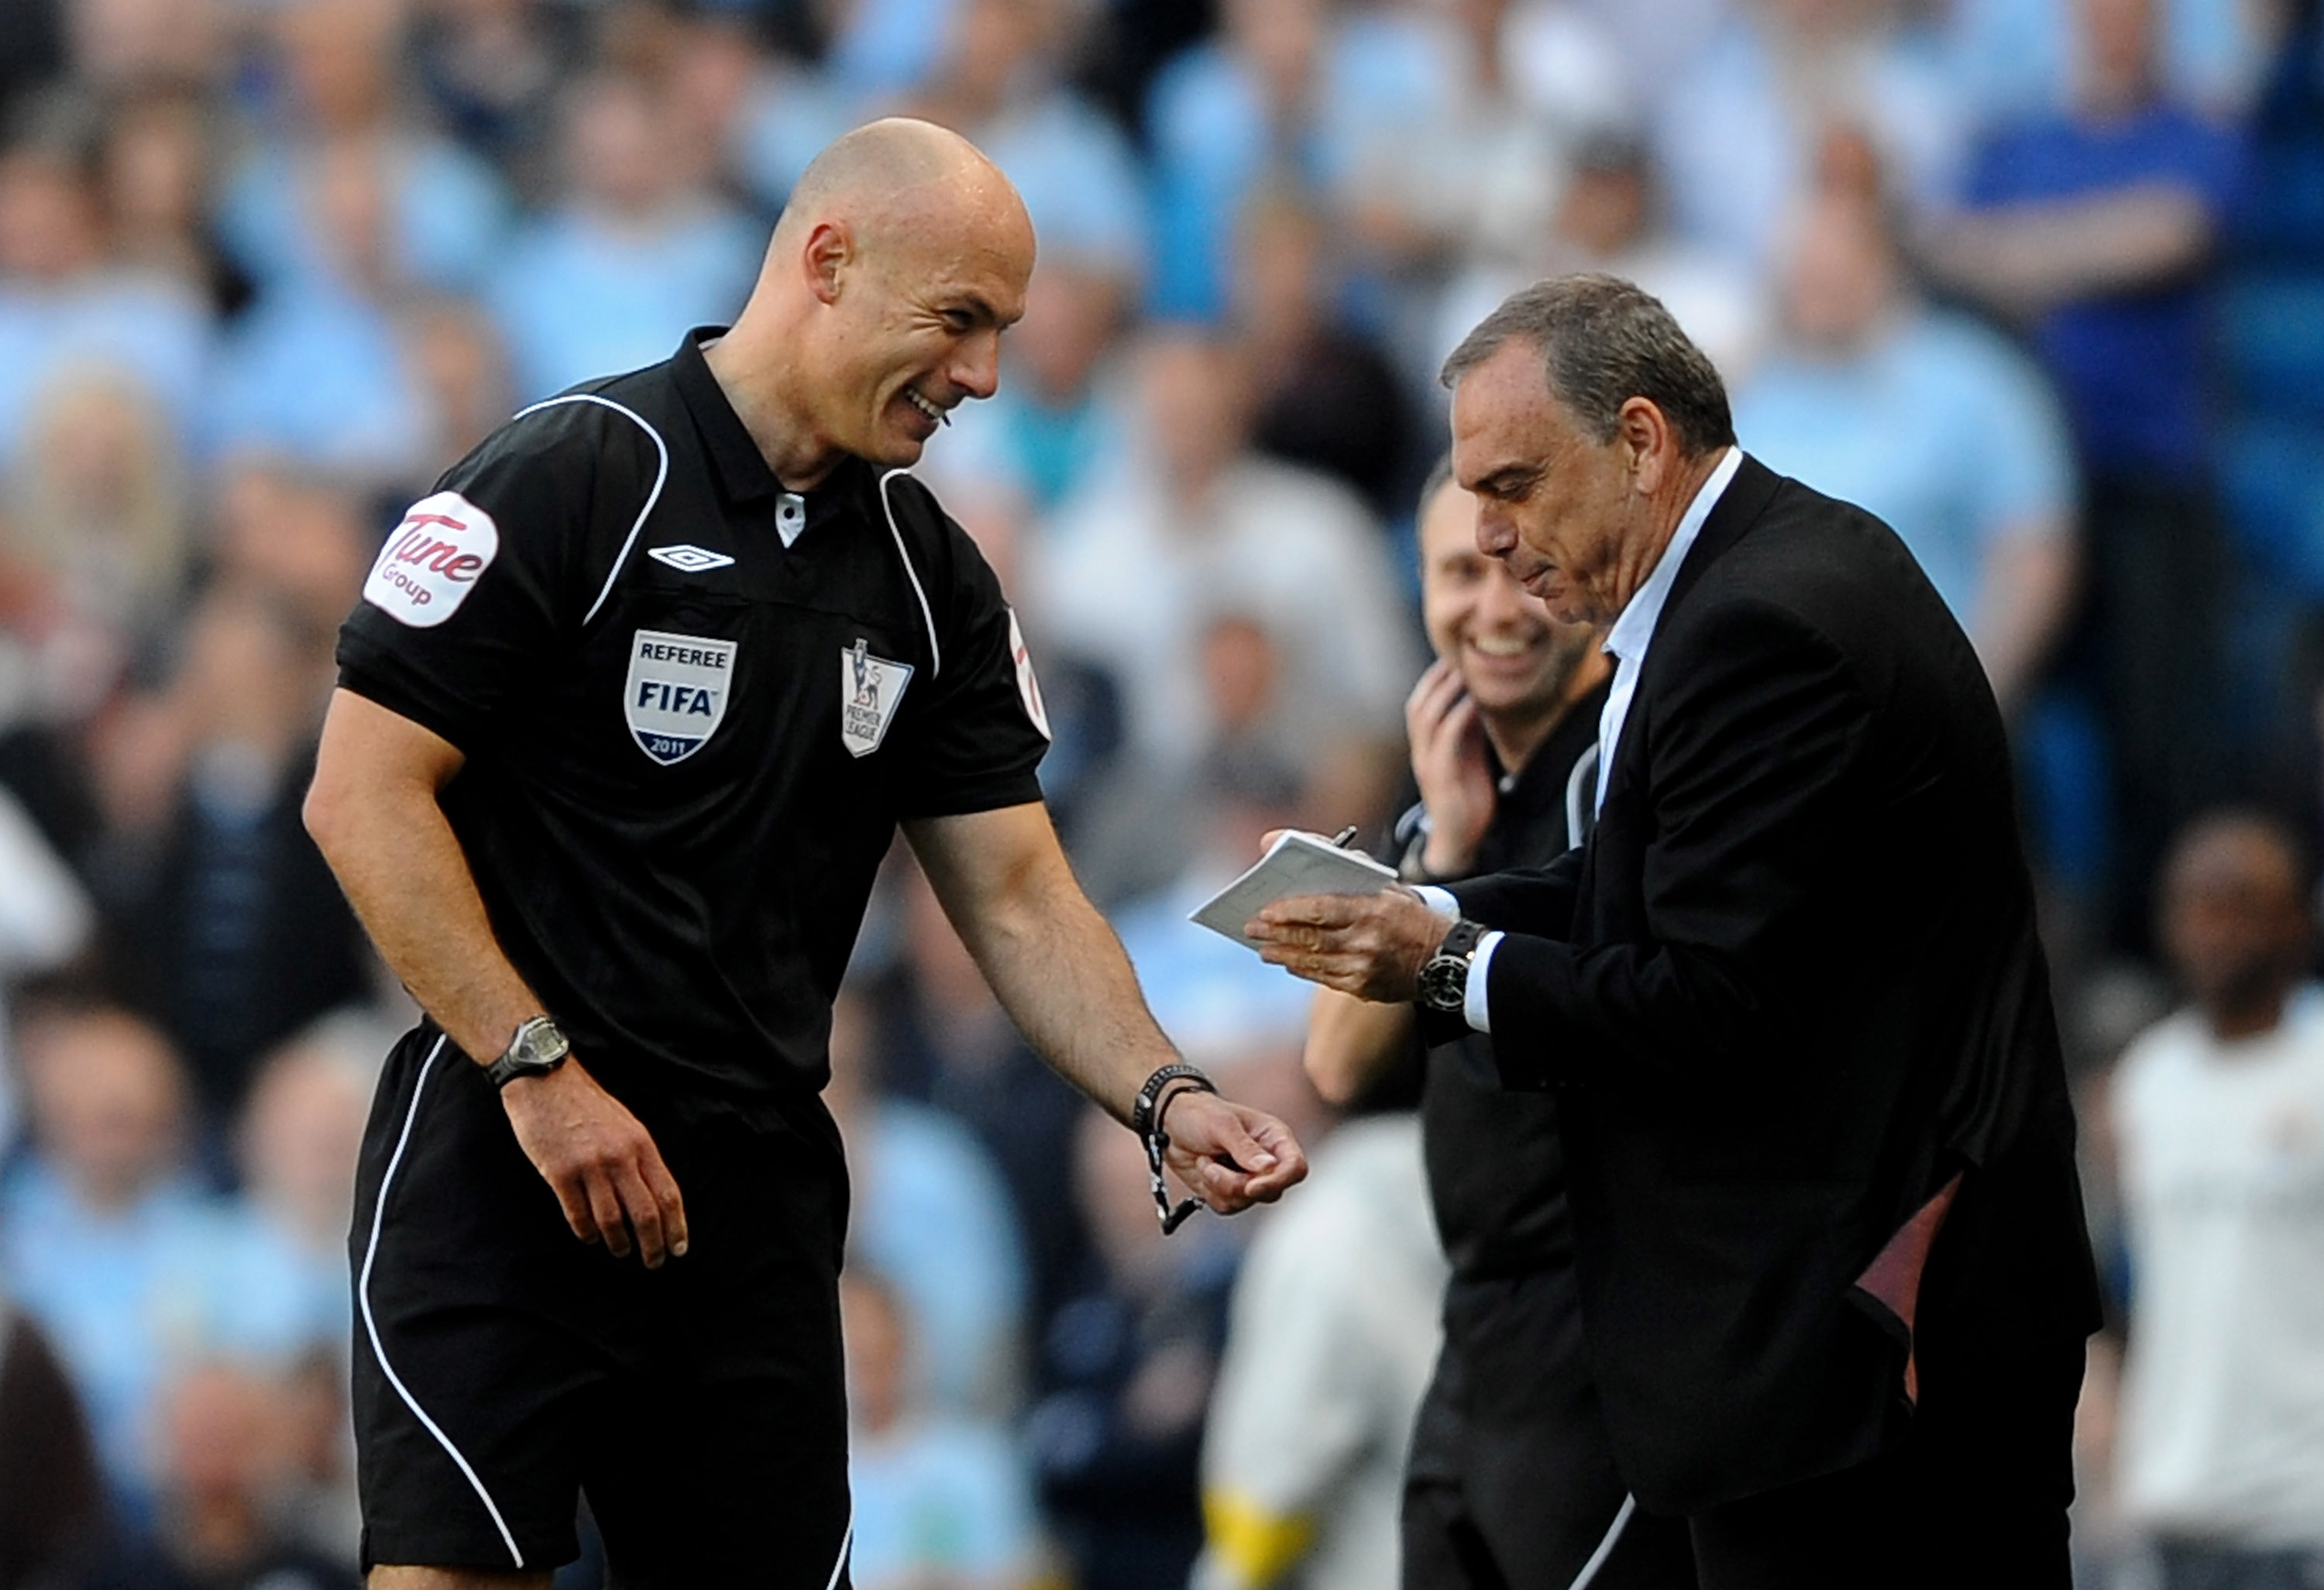 MANCHESTER, ENGLAND - MAY 01:  West Ham United Manager Avram Grant pretends to sign an autograph for Referee  Howard Webb after he dropped his notebook during the Barclays Premier League match between Manchester City and West Ham United at the City of Man